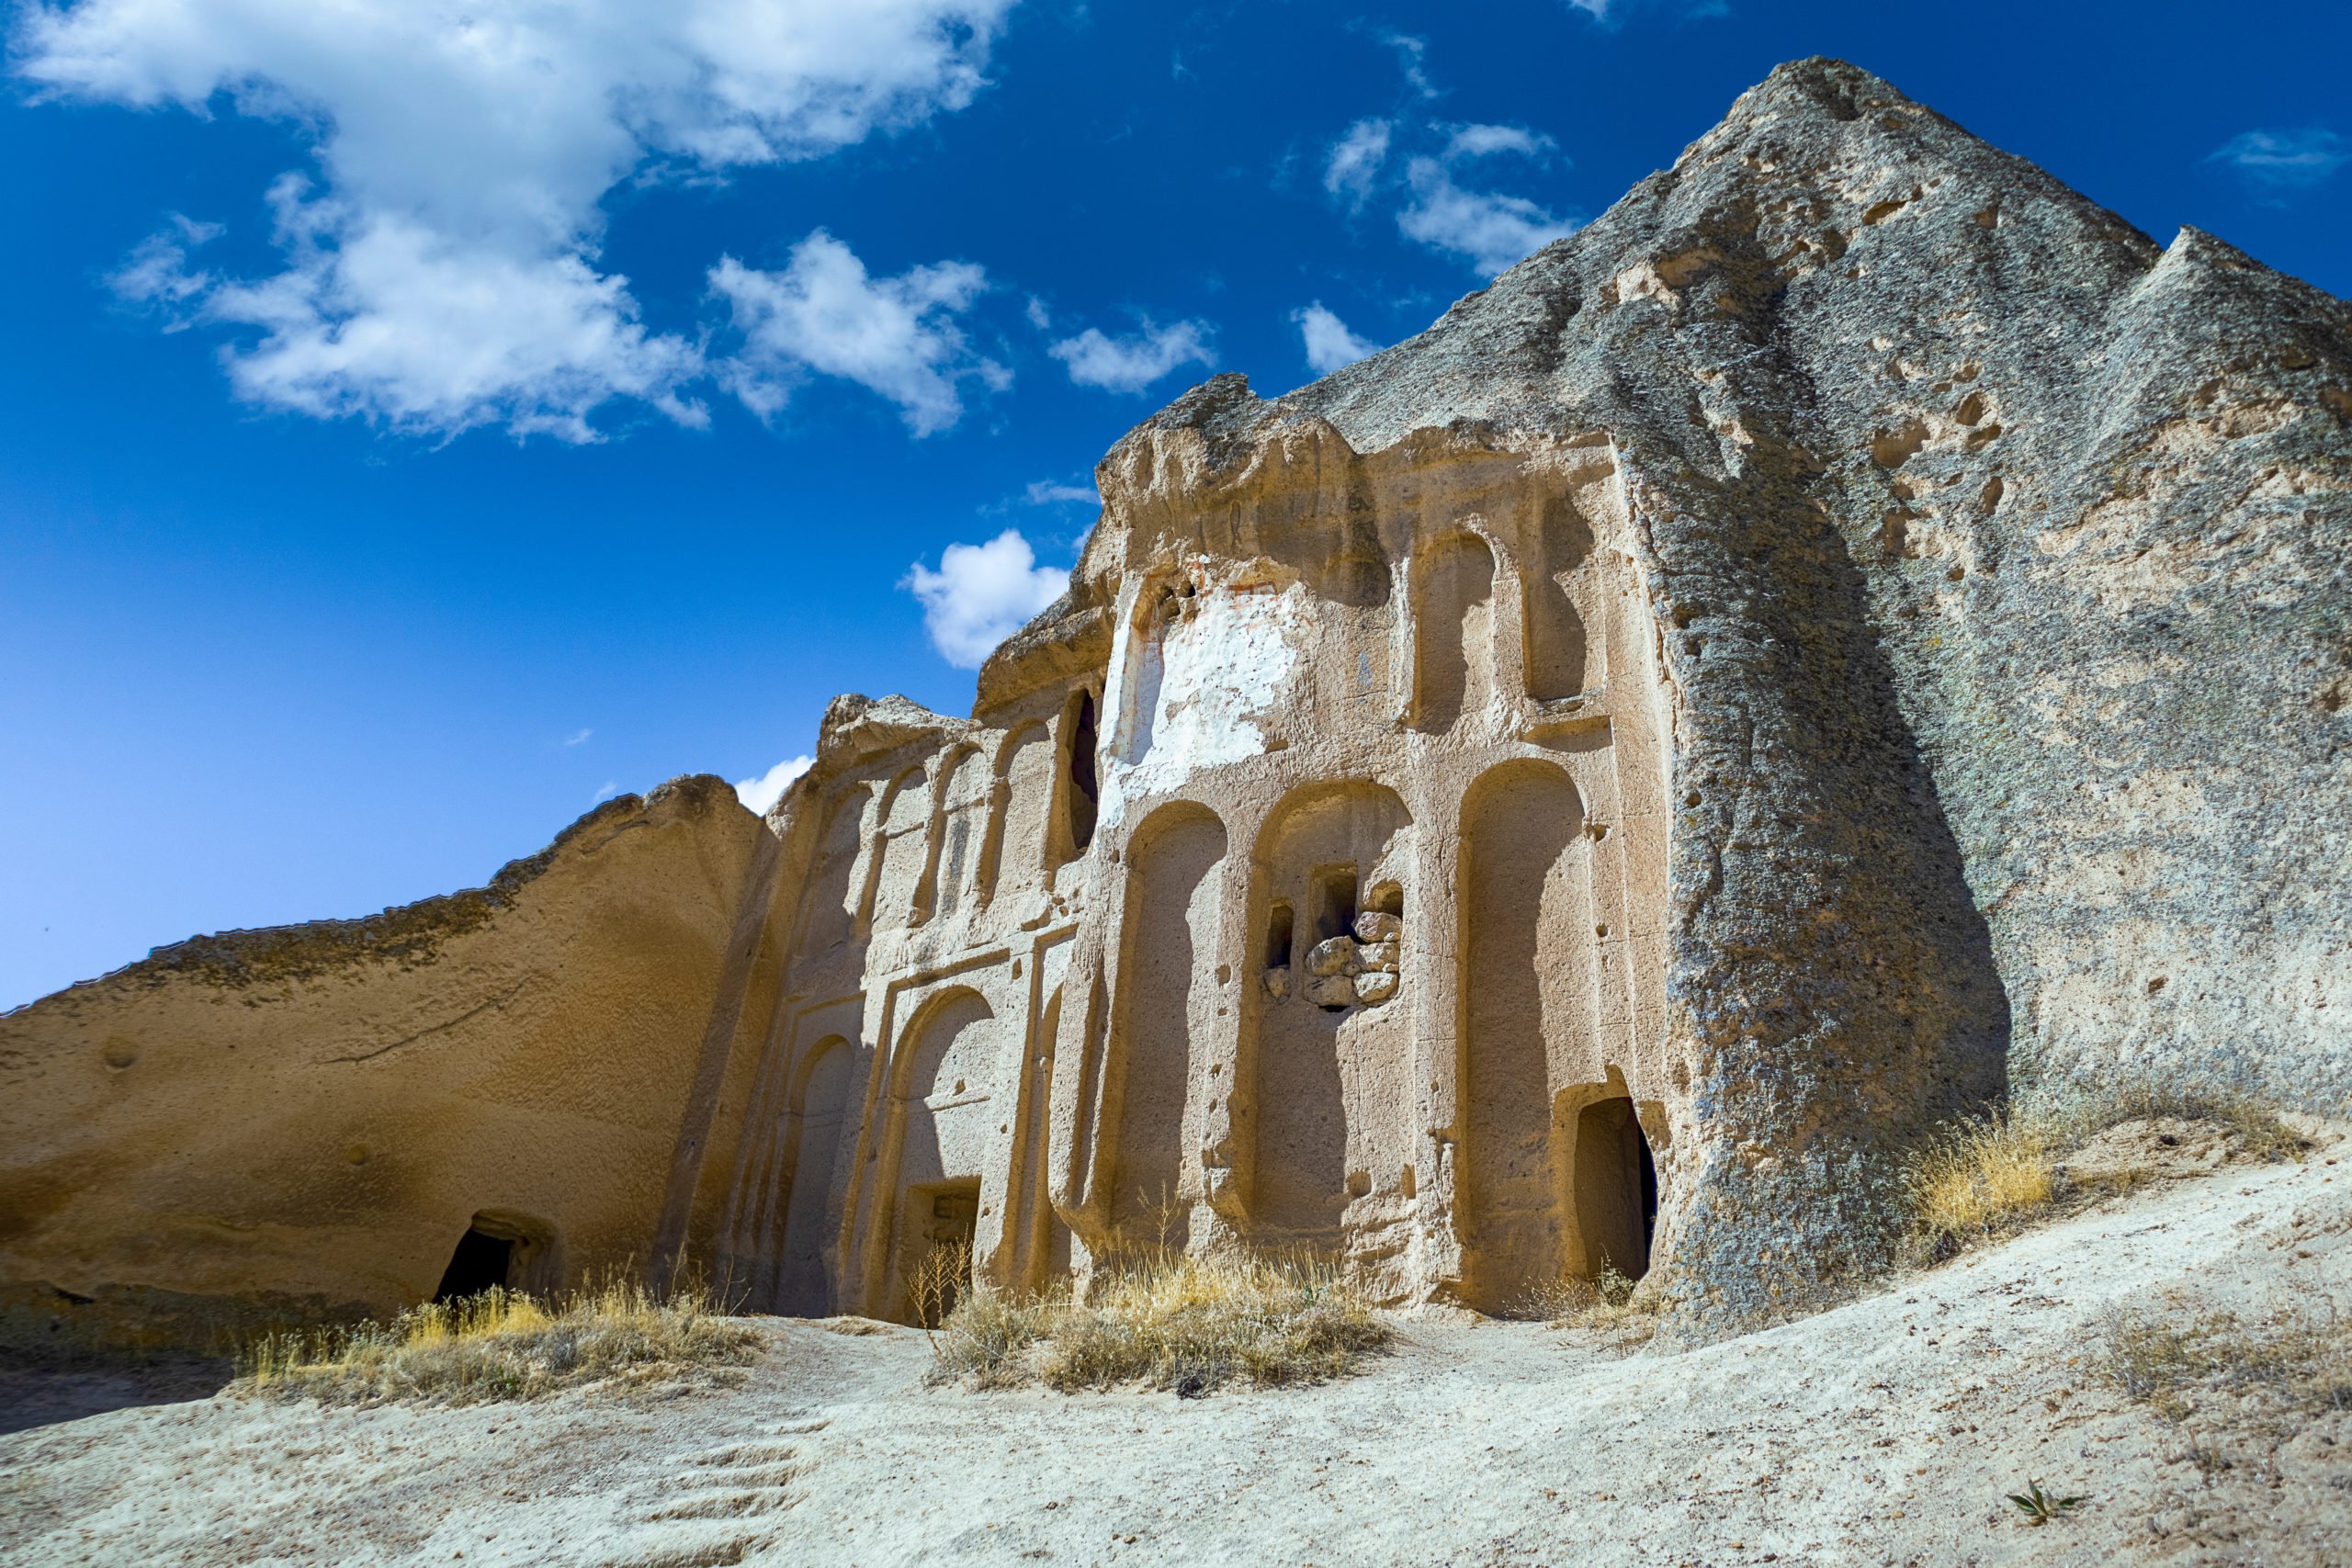 Discover The Selime Monastery On The Cappadocia Underground City Tour From Goreme